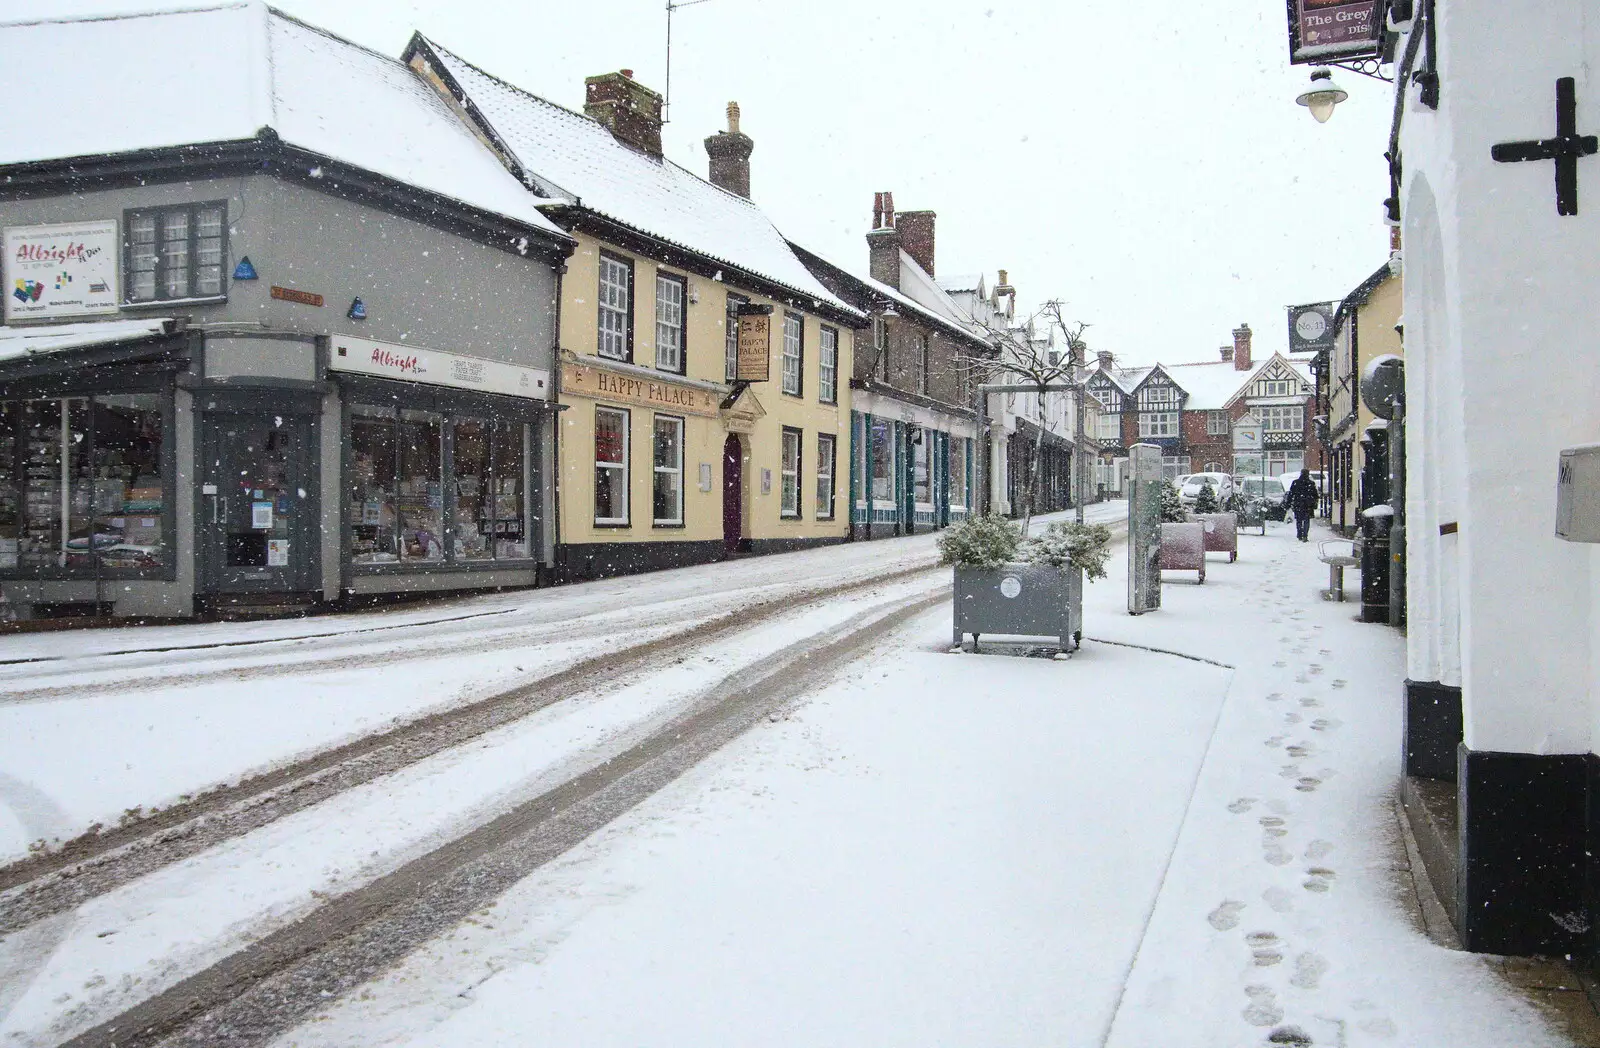 The very top of St. Nicholas Street, from A Snowy Morning, Diss, Norfolk - 16th January 2021